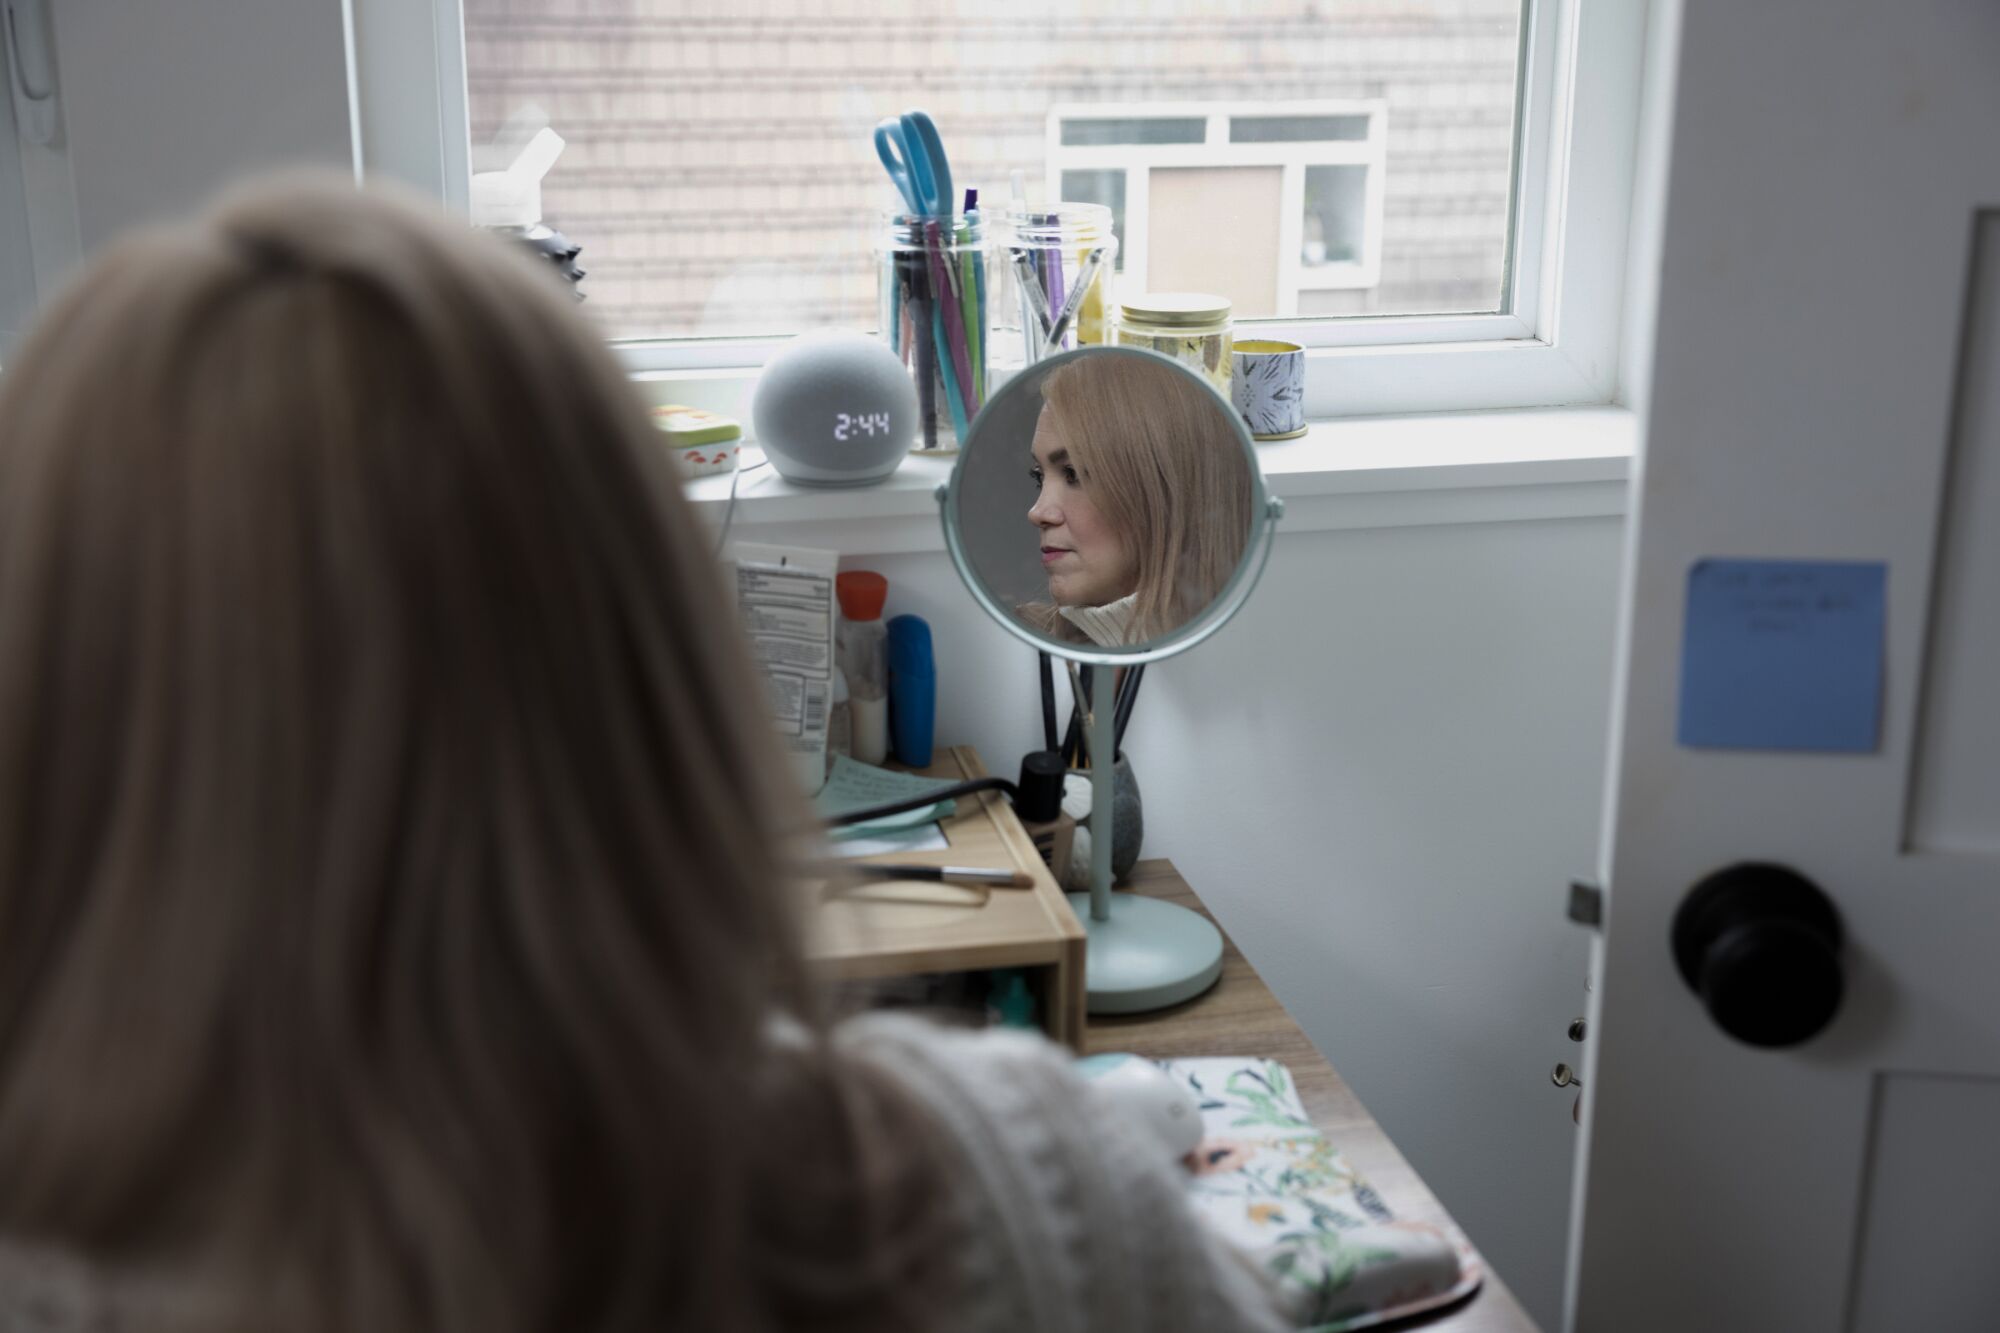 A woman sitting at a vanity table, her face reflected in a mirror